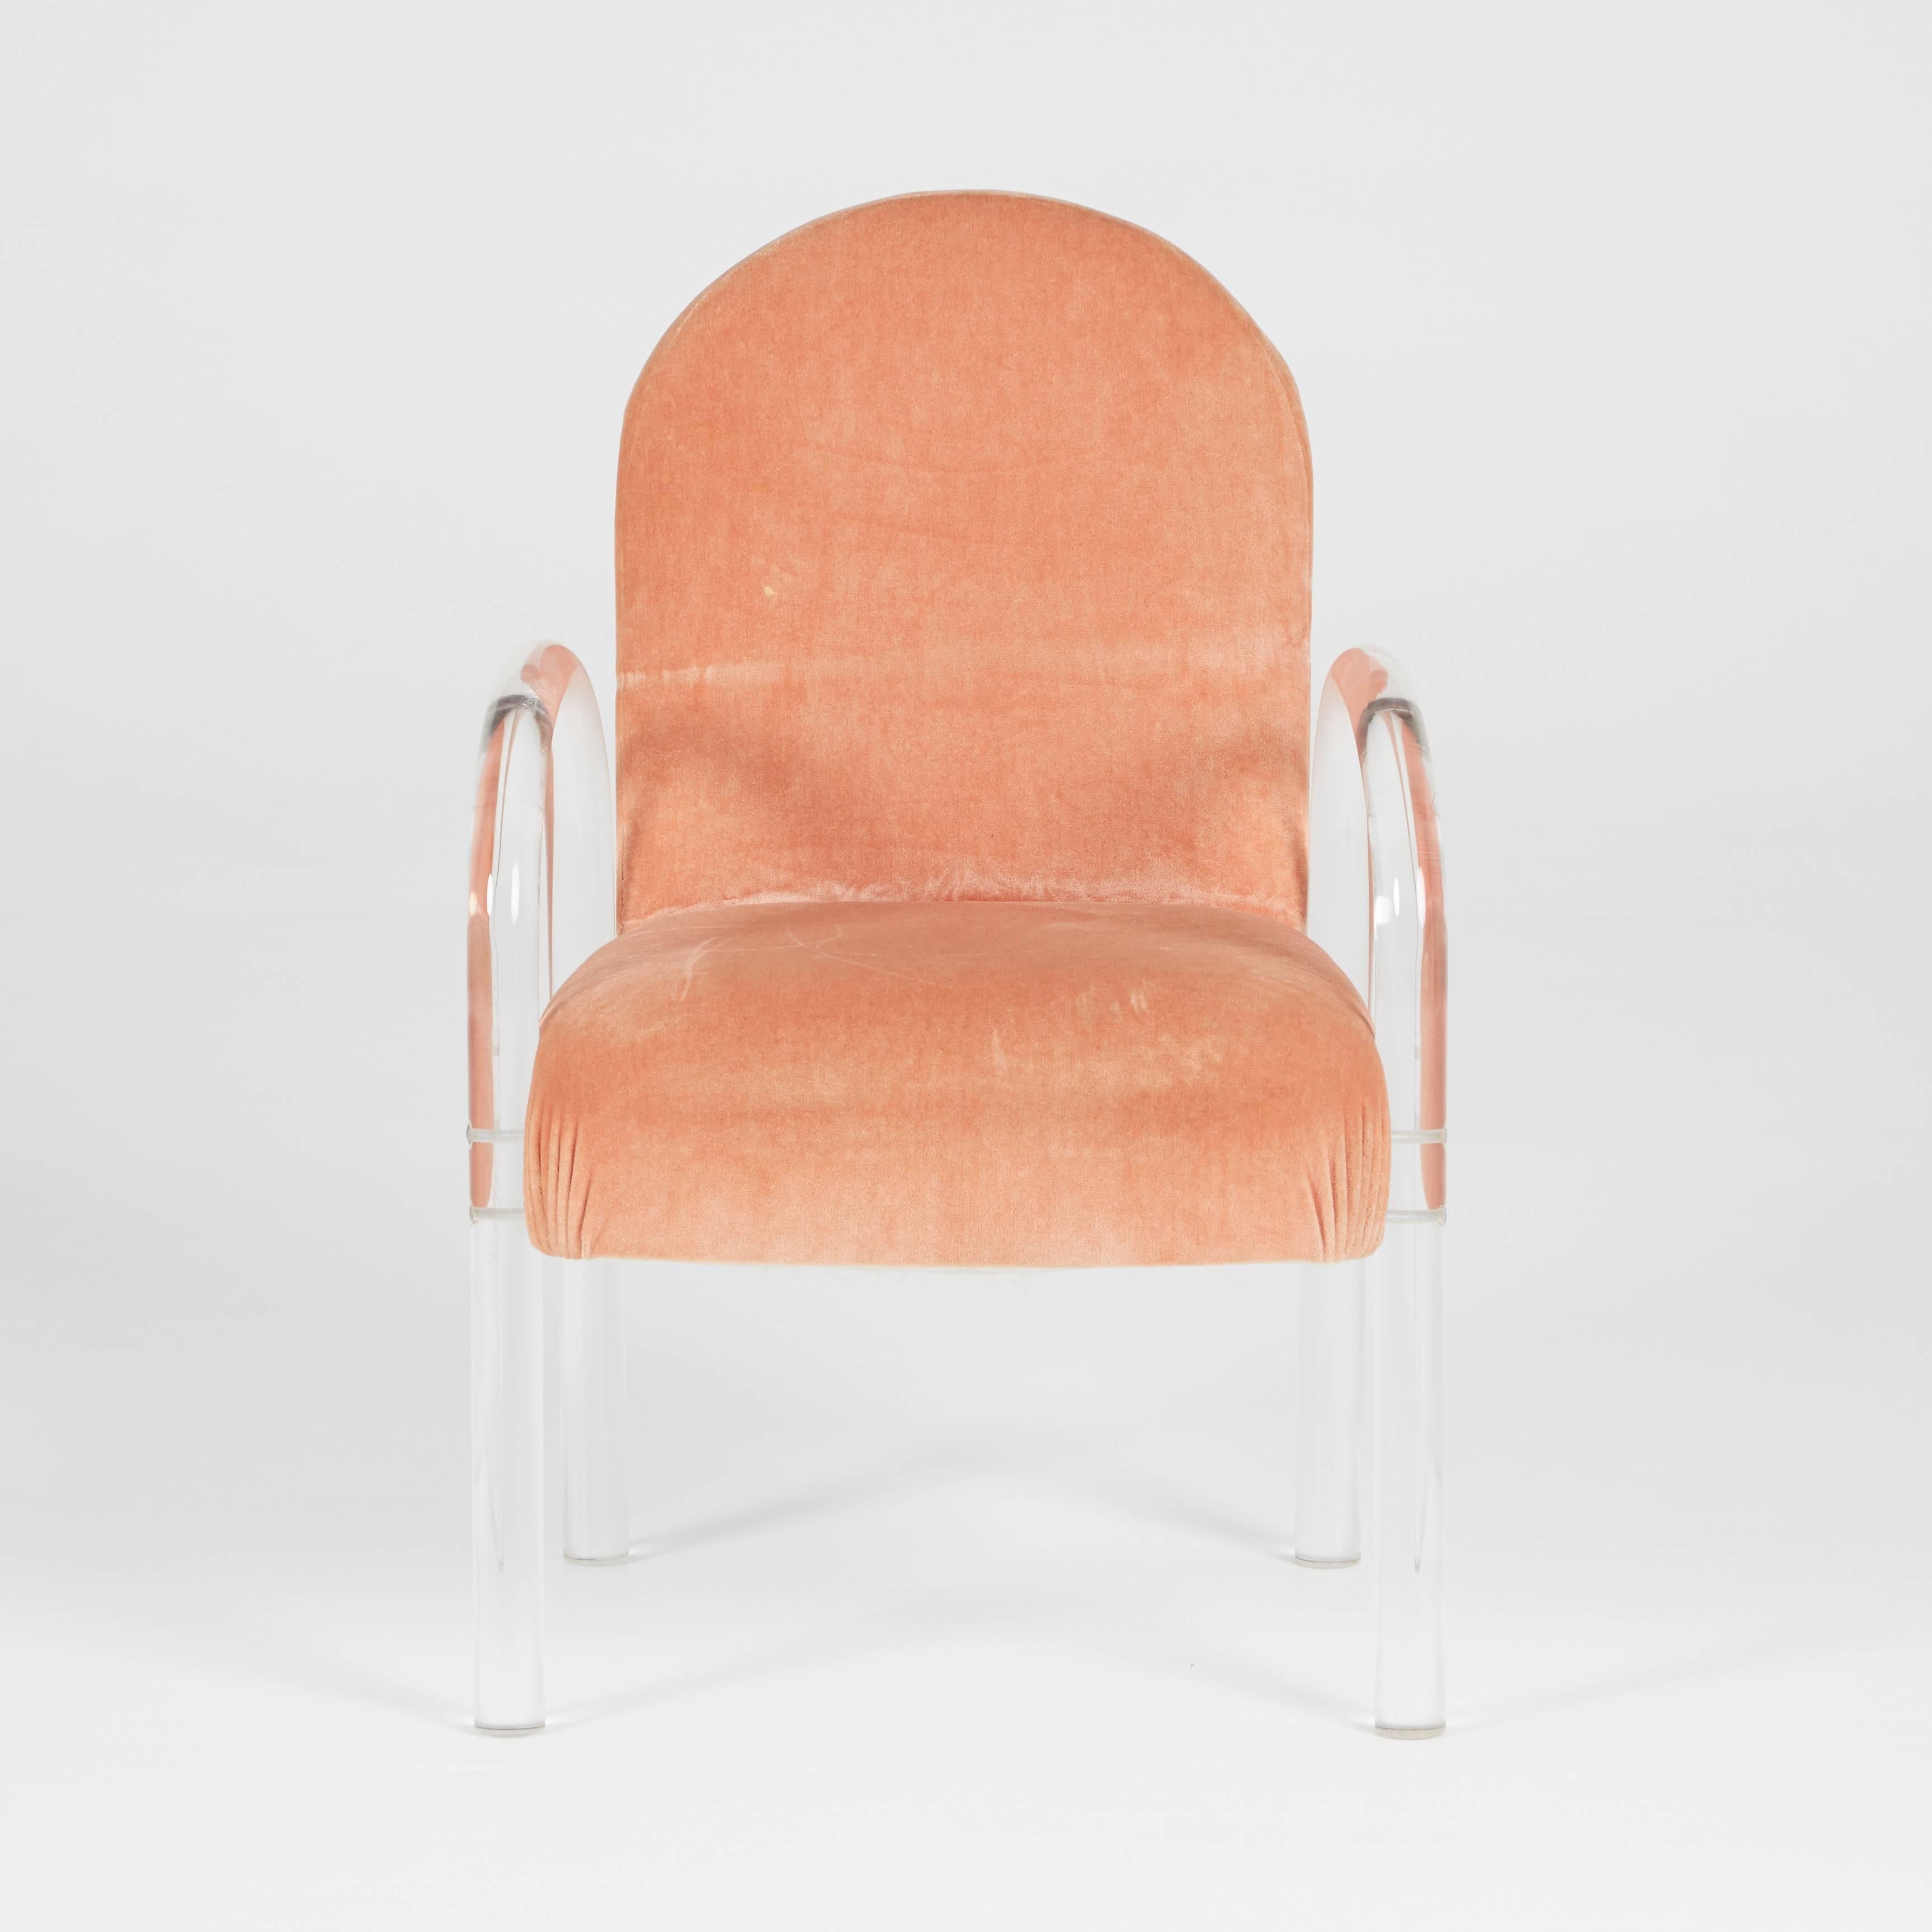 An incredible set of pink velvet and Lucite armchairs with original fabric and Lucite frames. In immaculate condition for its age, the Lucite frames look almost brand new and the fabric is clean and free of major blemishes. We believe the original